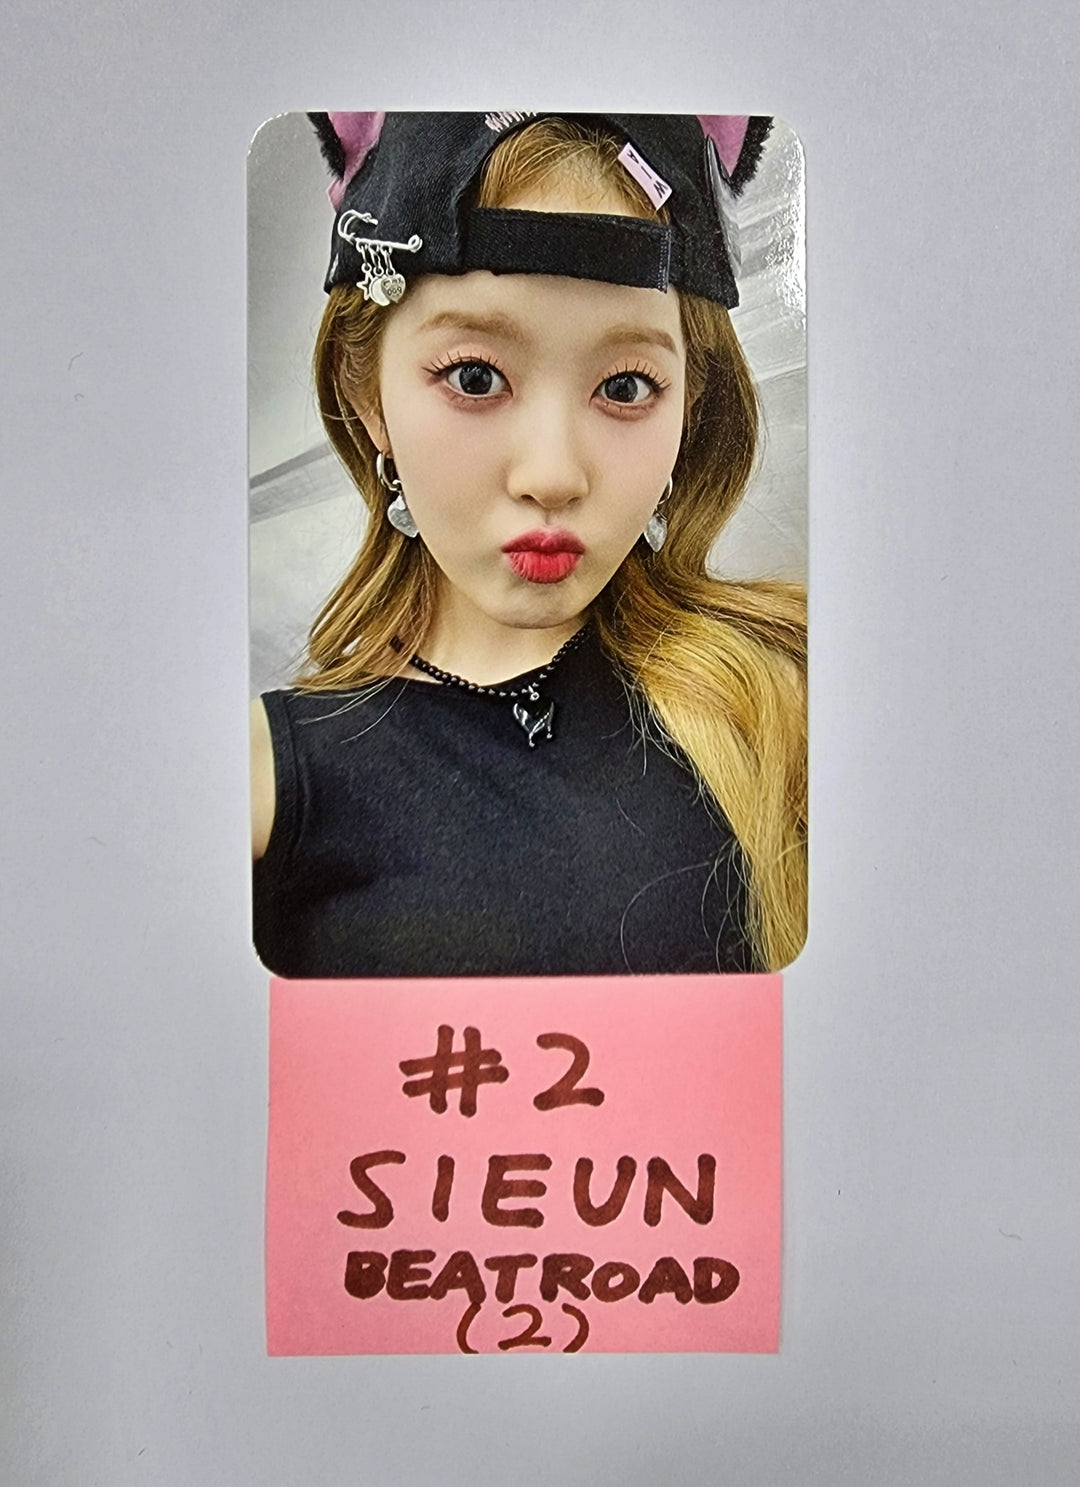 StayC "Teddy Bear" - Beatroad Fansign Event Photocard [Digipack Ver.]